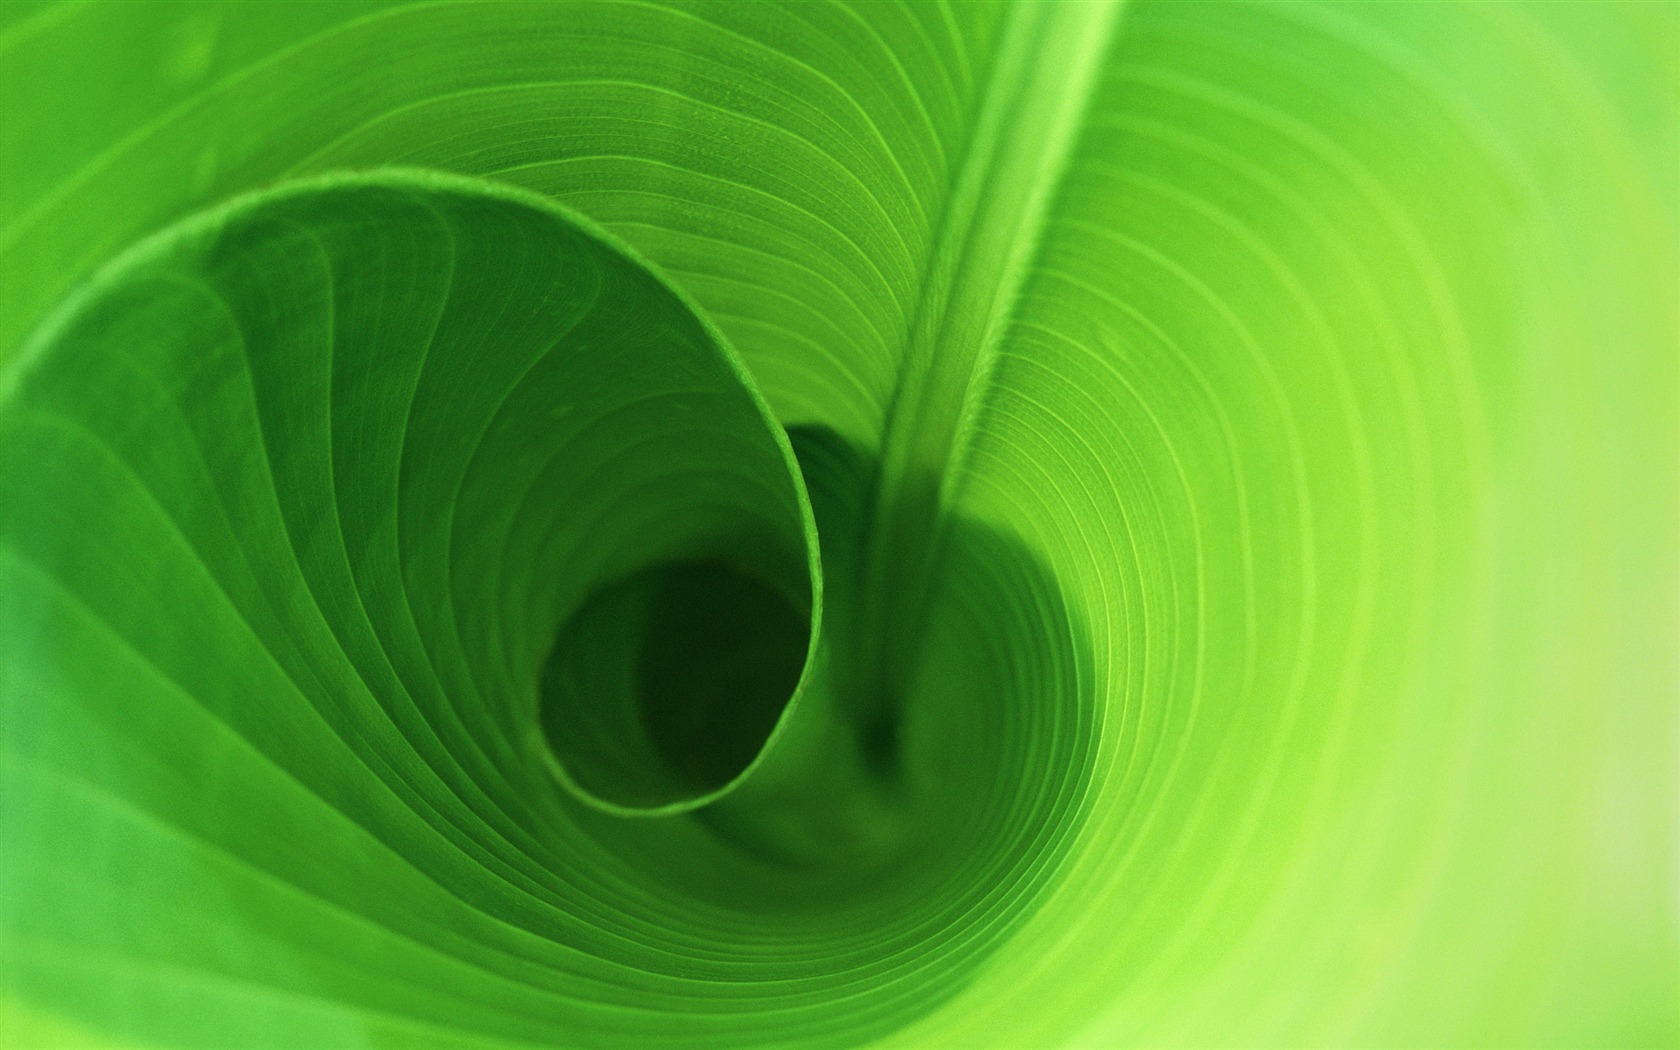 Large green leaves close-up flower wallpaper (2) #3 - 1680x1050